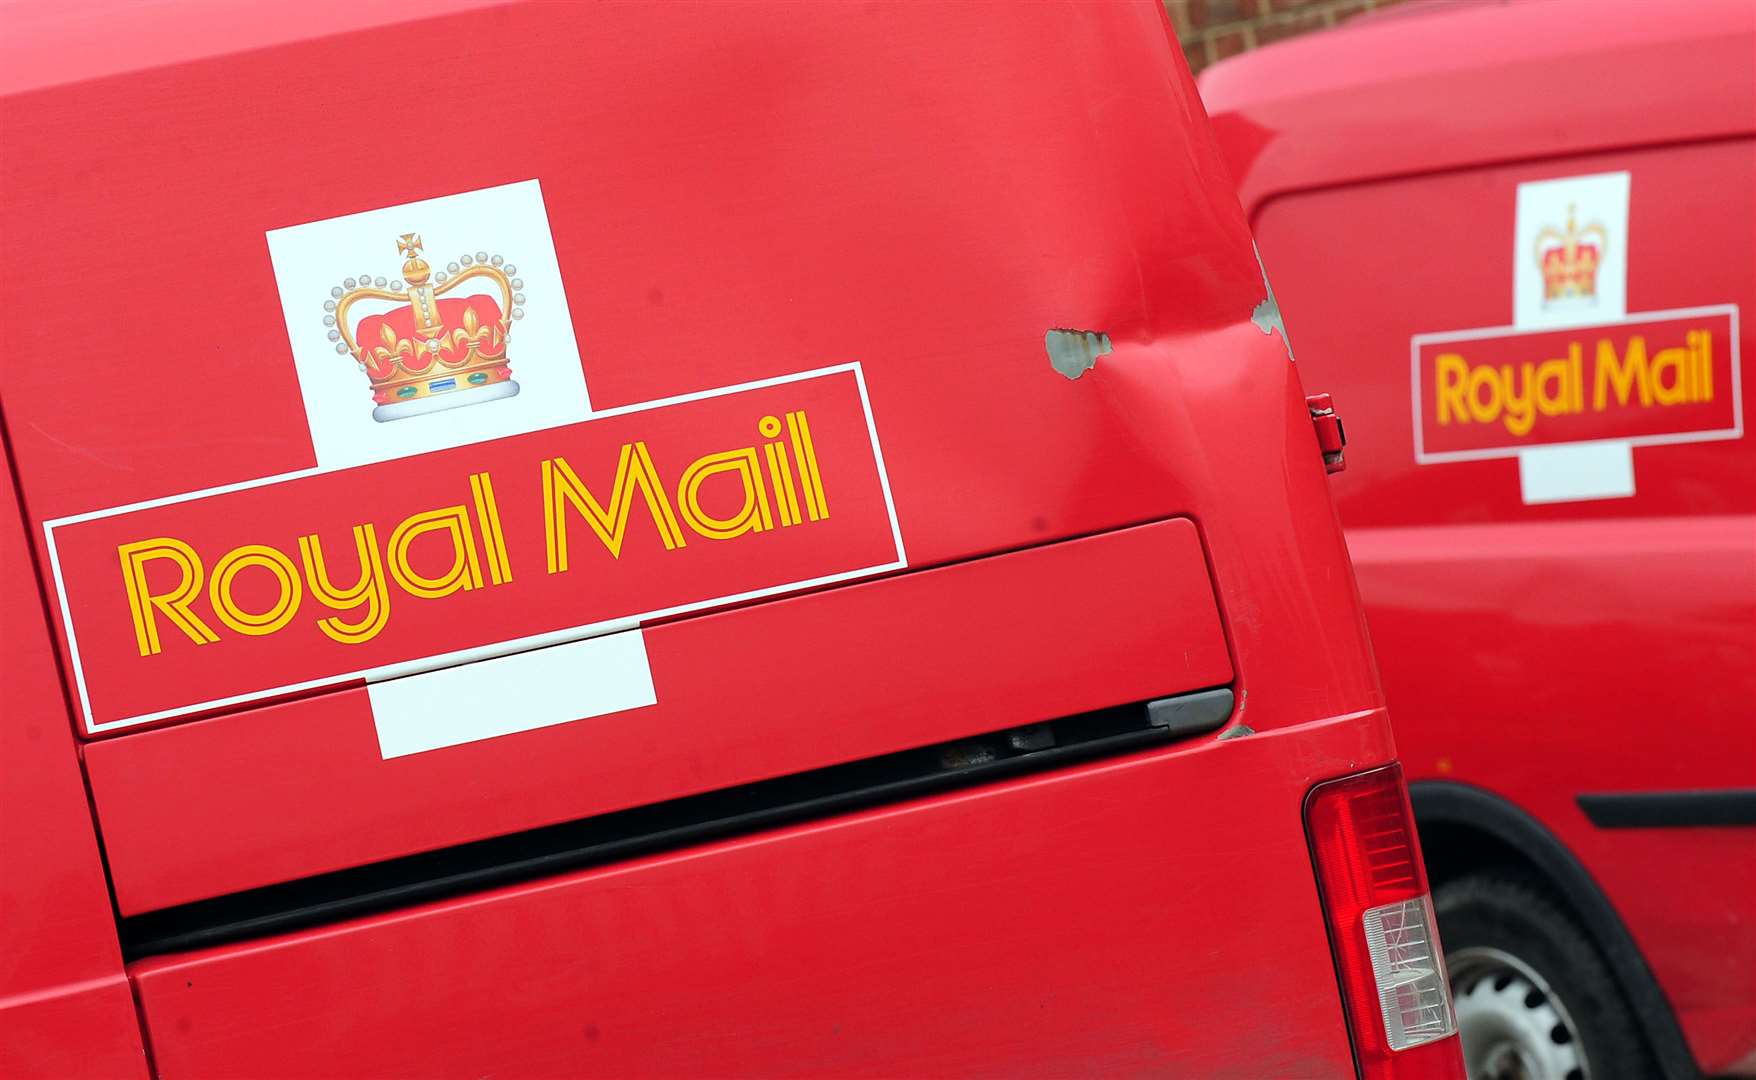 The price increases come as Royal Mail faces heavy financial losses (Rui Vieira/PA)